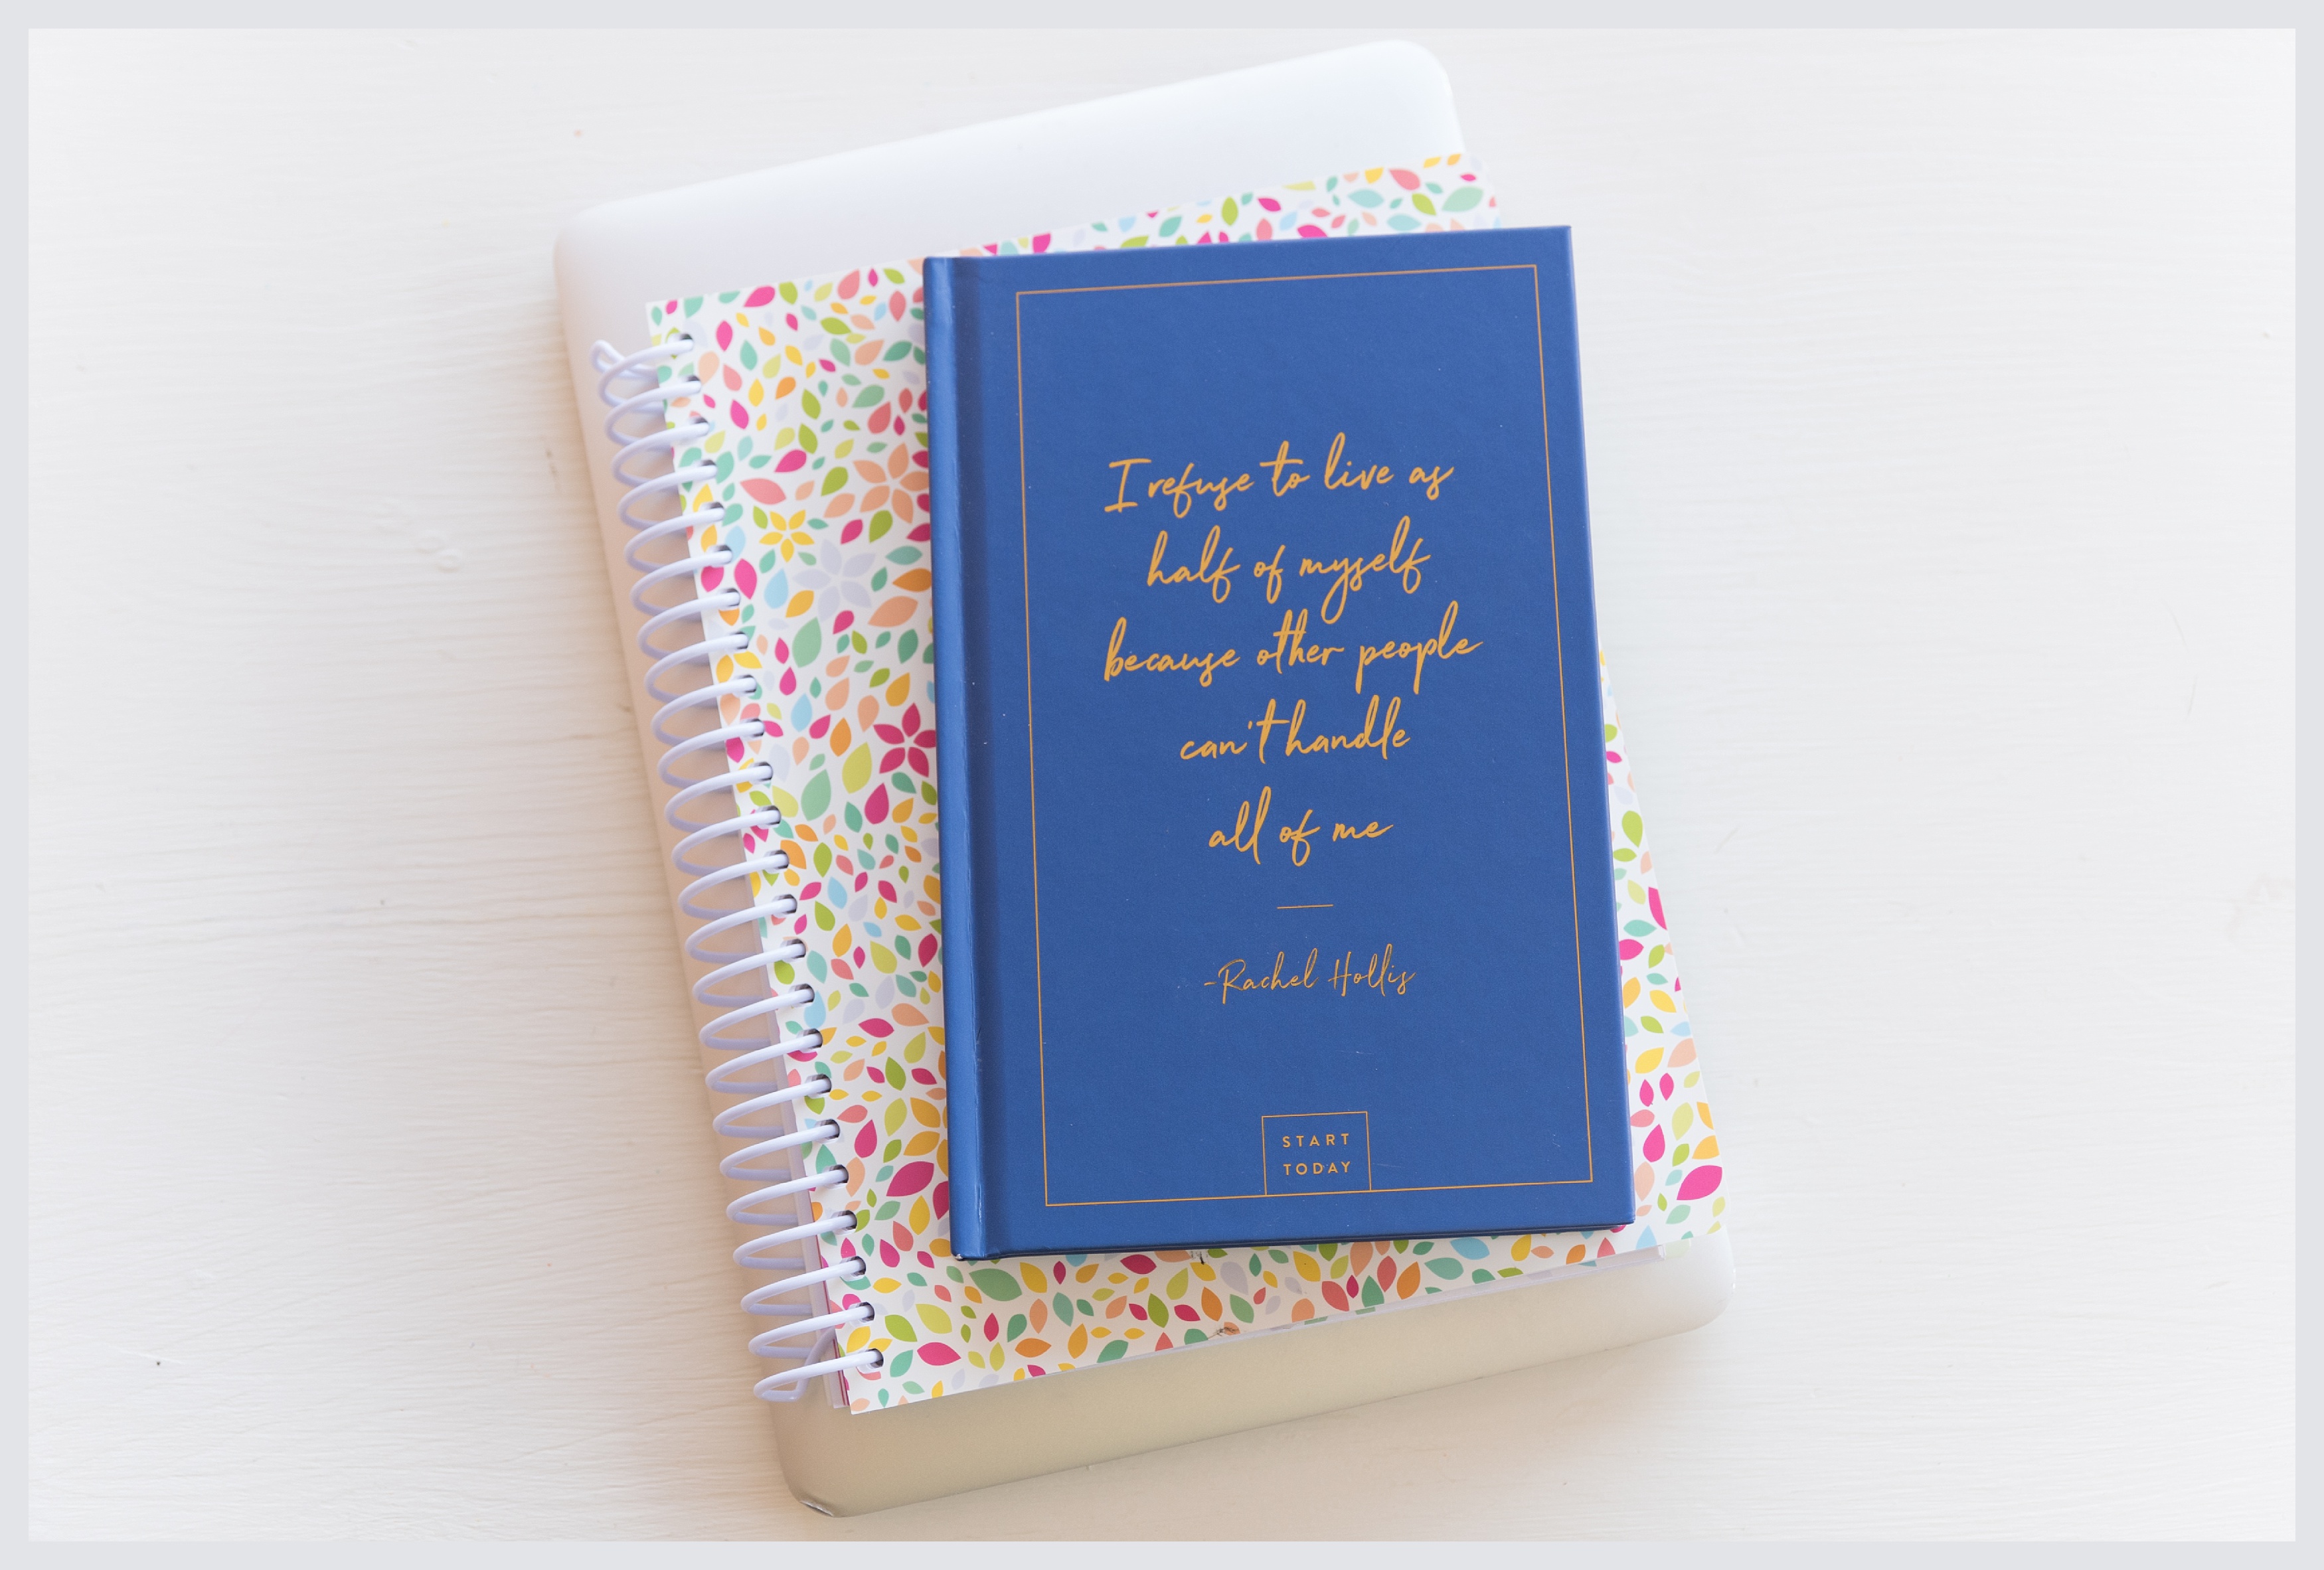 New Year, New Me, with New tools; Cultivate What Matters Powersheets and Start Today Journal.